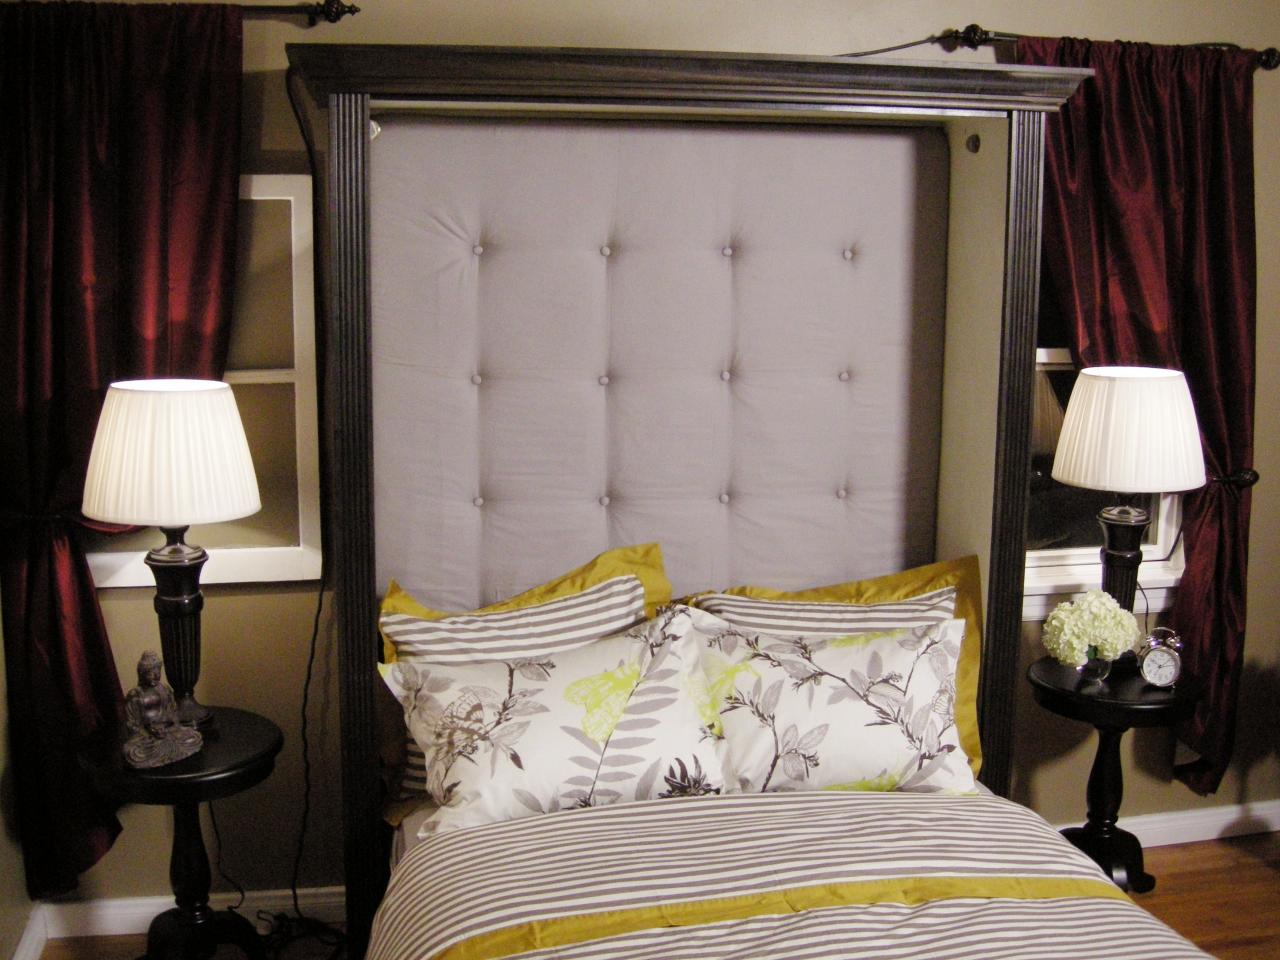 How To Make A Tufted Headboard, Best Way To Attach Headboard Wall Bed